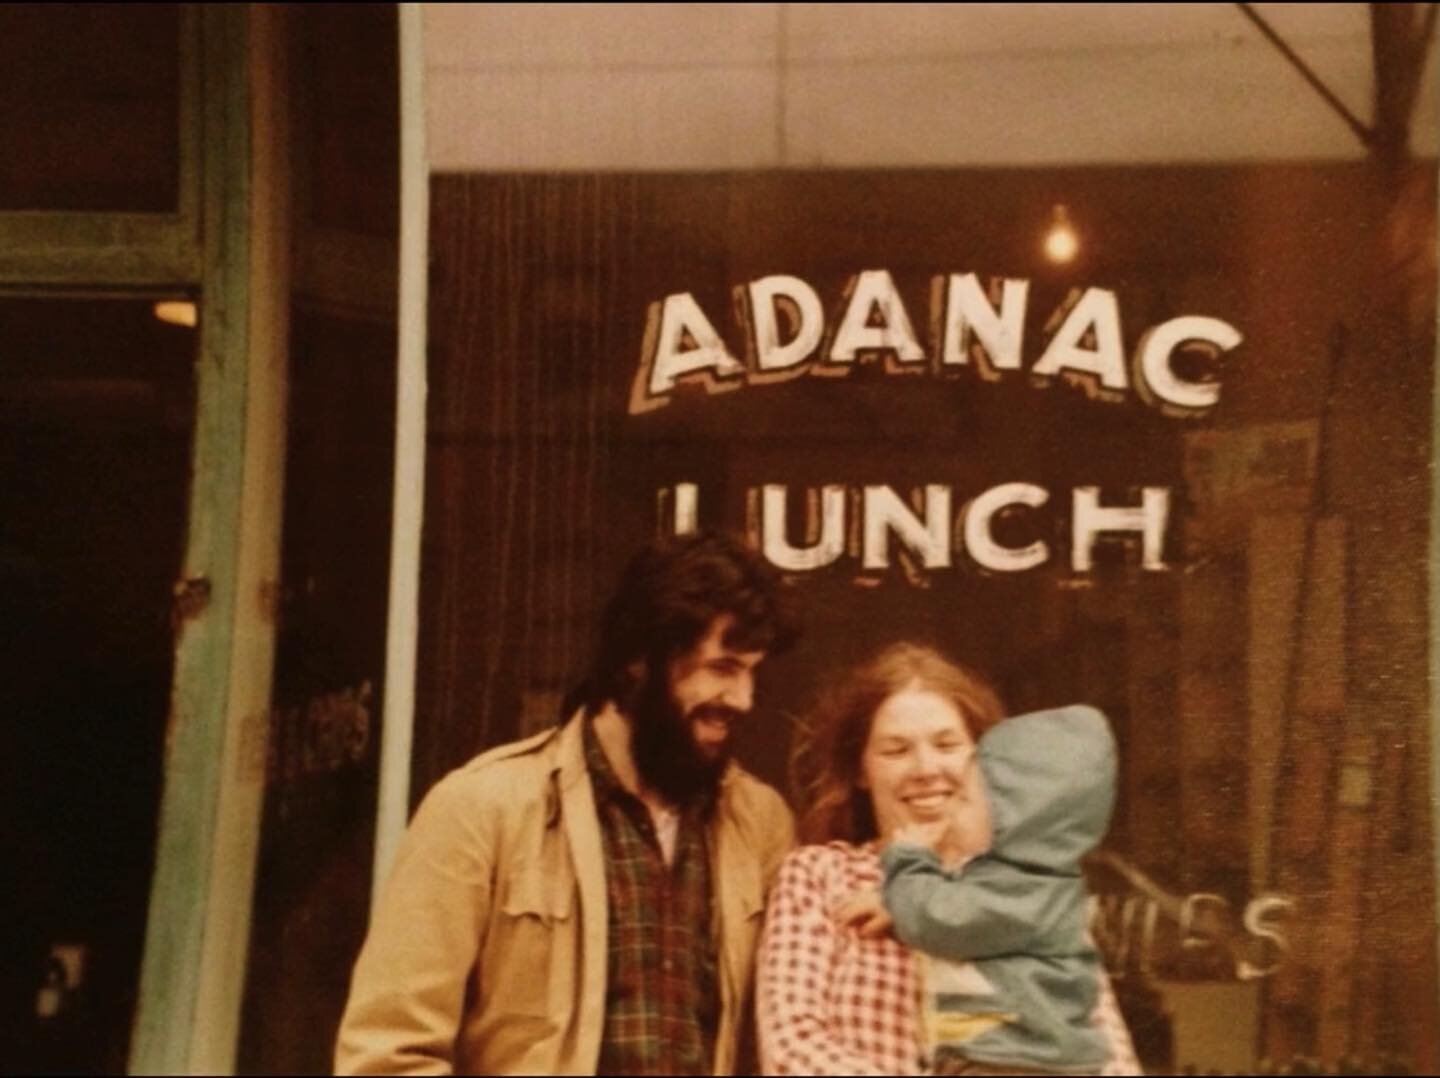 Adanac Lunch, mid 70s. Back in your old hood and raising a glass to 72 years&hellip; had to be some kinda love to drag you away from the west coast. Cheers to that🍻#papawasarollingstone #aintnowordscantell #AdanacLunch #hbd